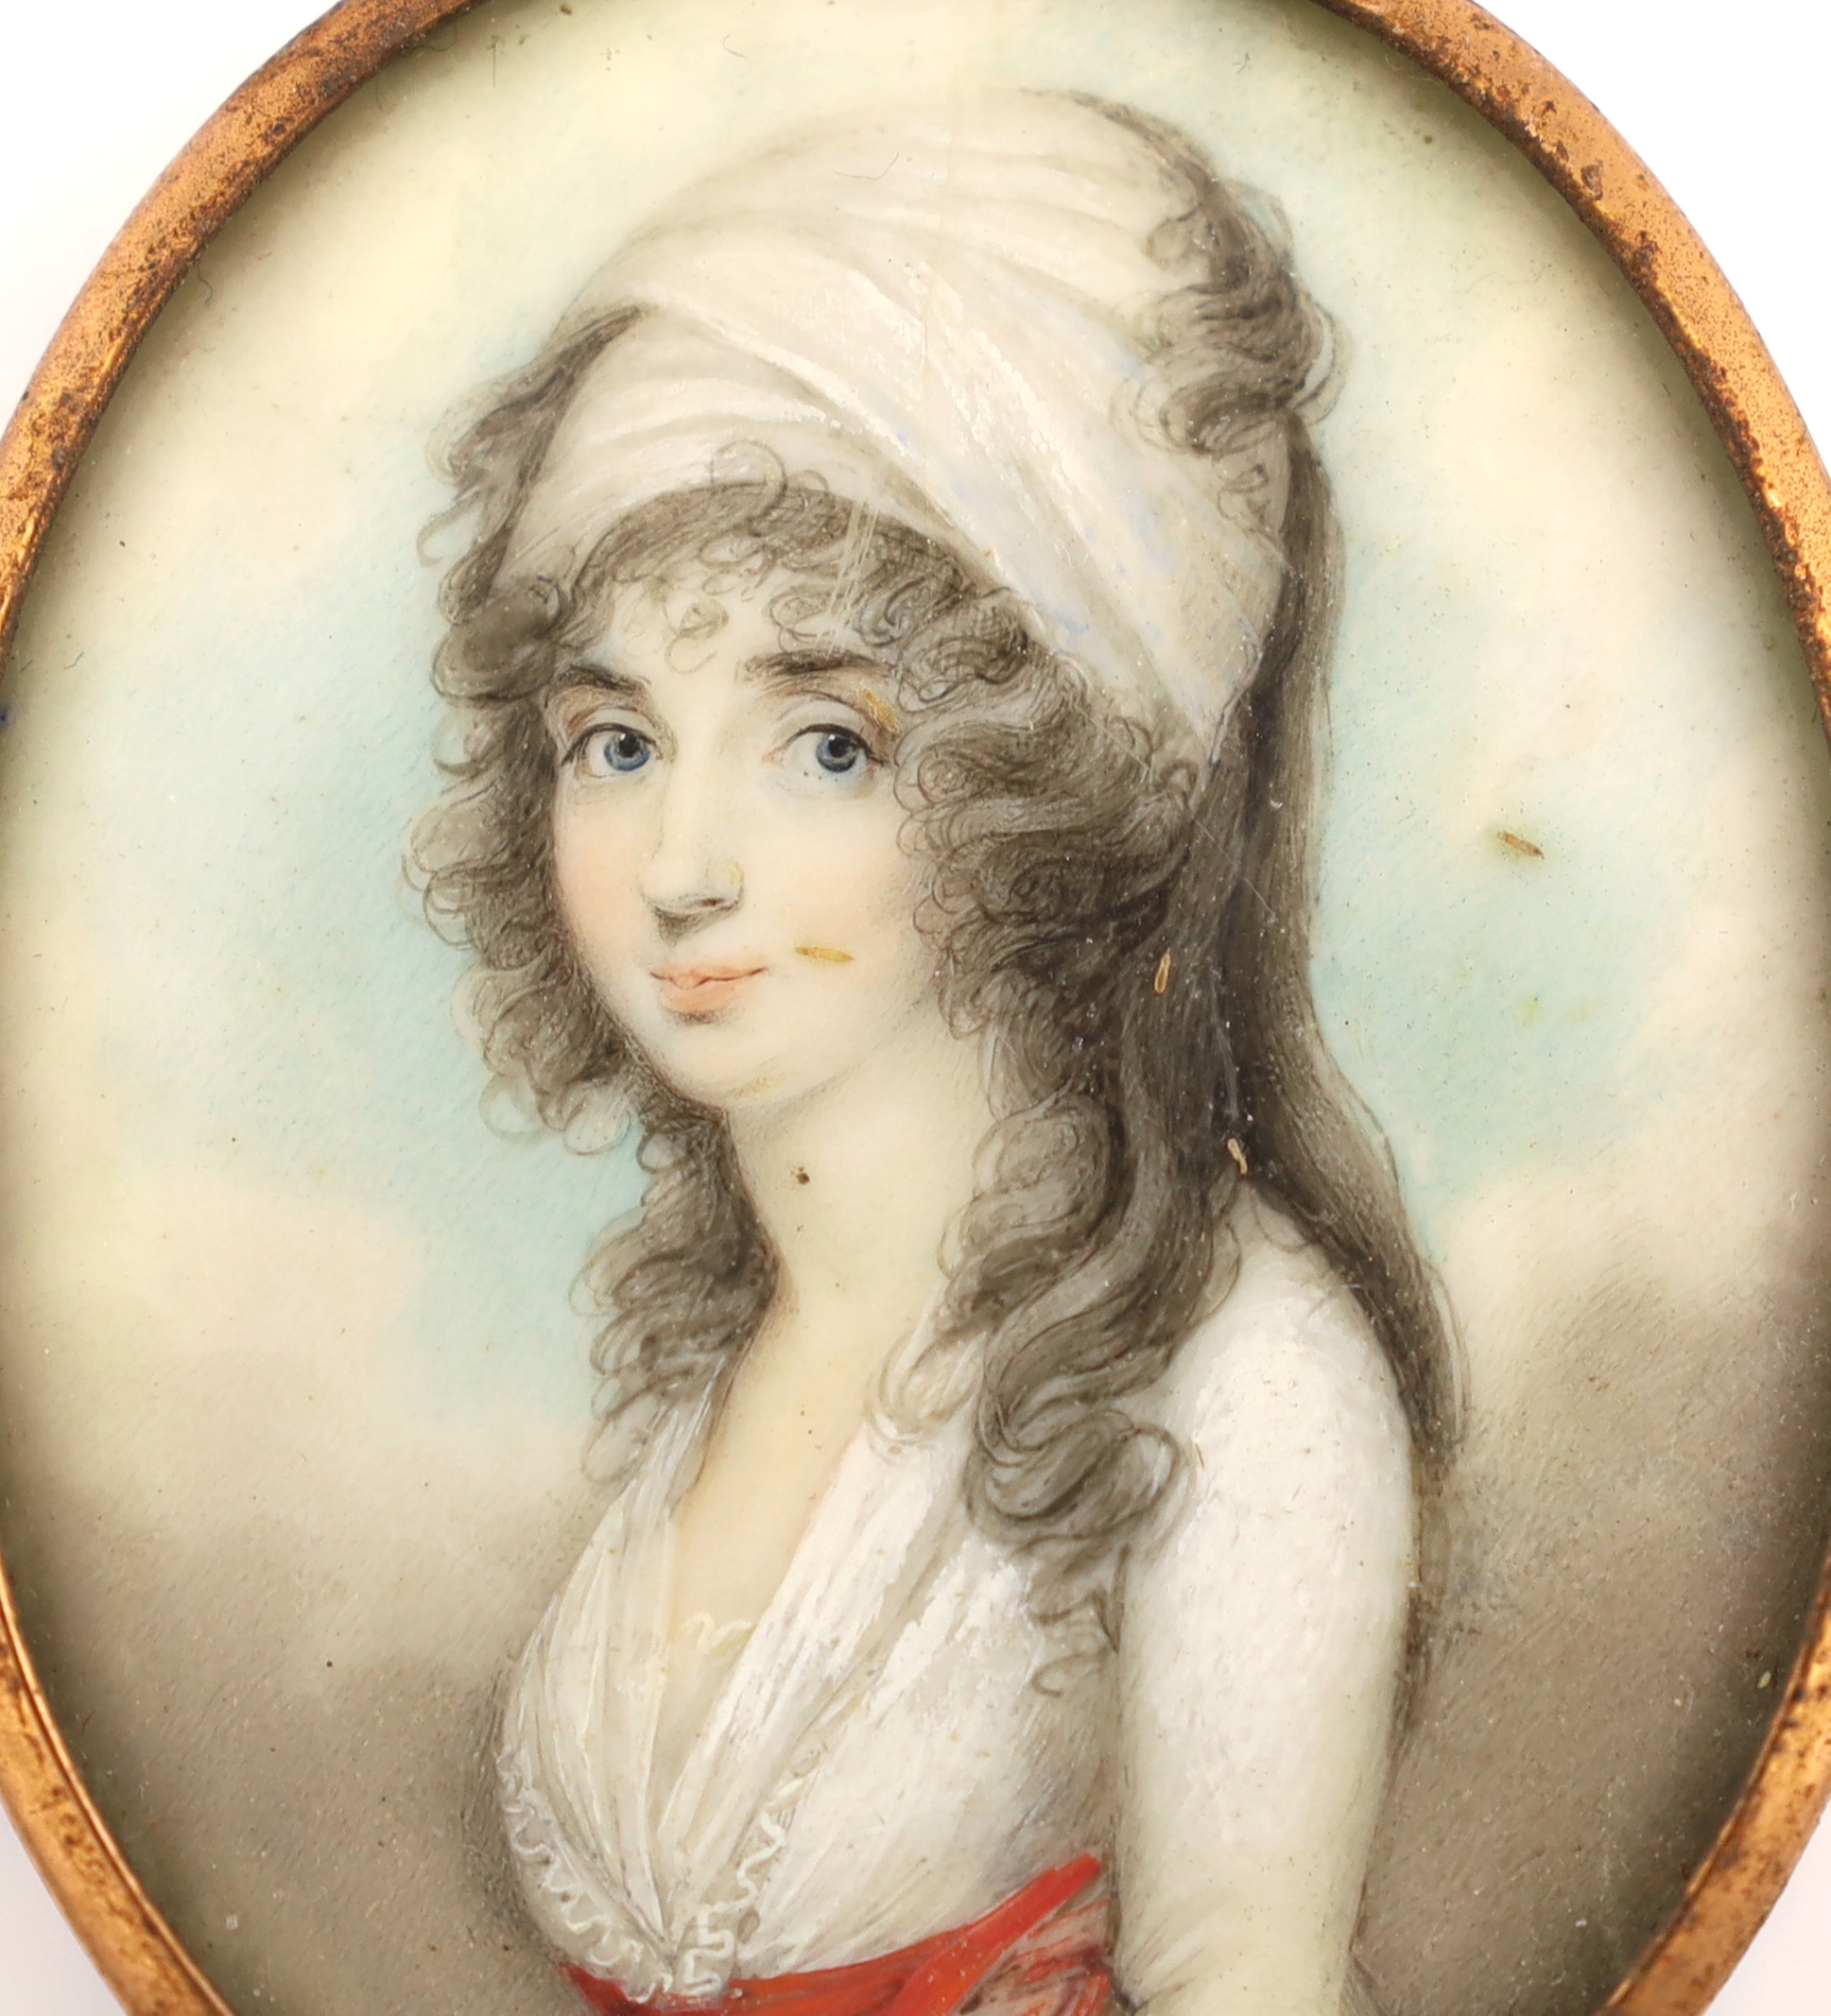 Jacob Axel Gillberg (Swedish, 1769-1845), Portrait miniature of a lady, watercolour on ivory, 6.5 x 5.1cm. CITES Submission reference 711CBPRV